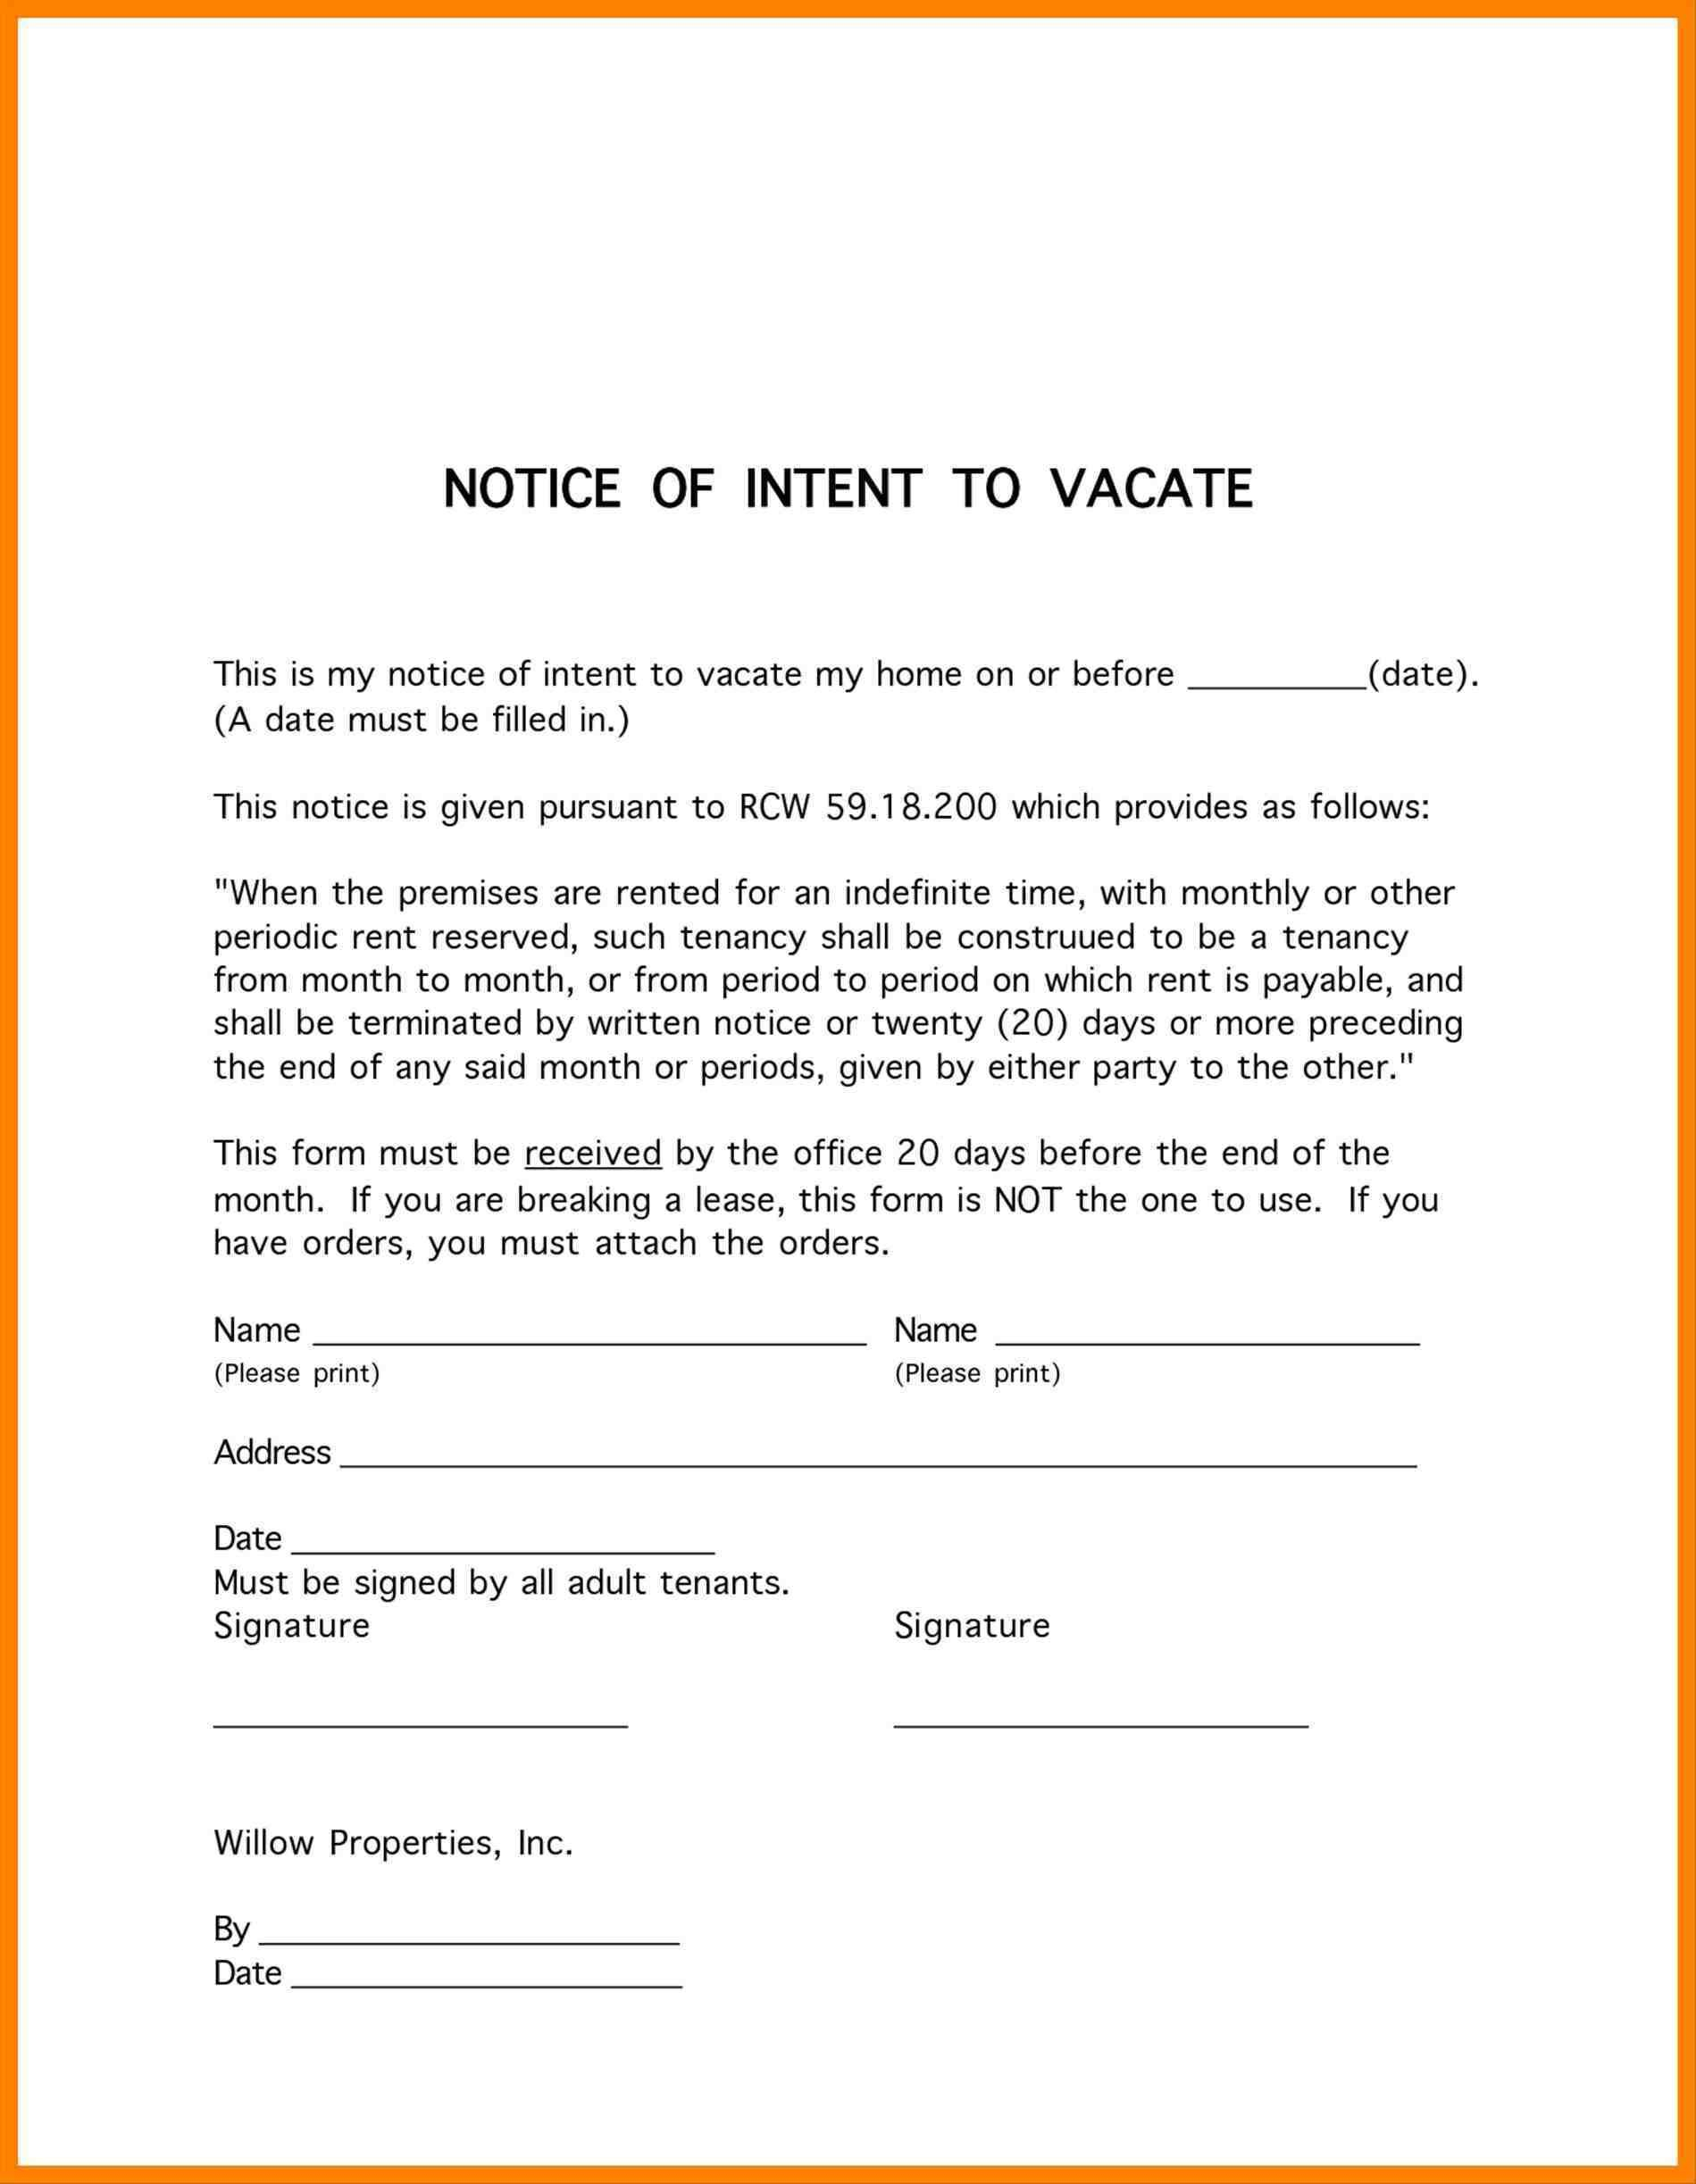 Breaking Lease Agreement Letter Template - Final Notice before Legal Best Collections Notice Template Photos Of